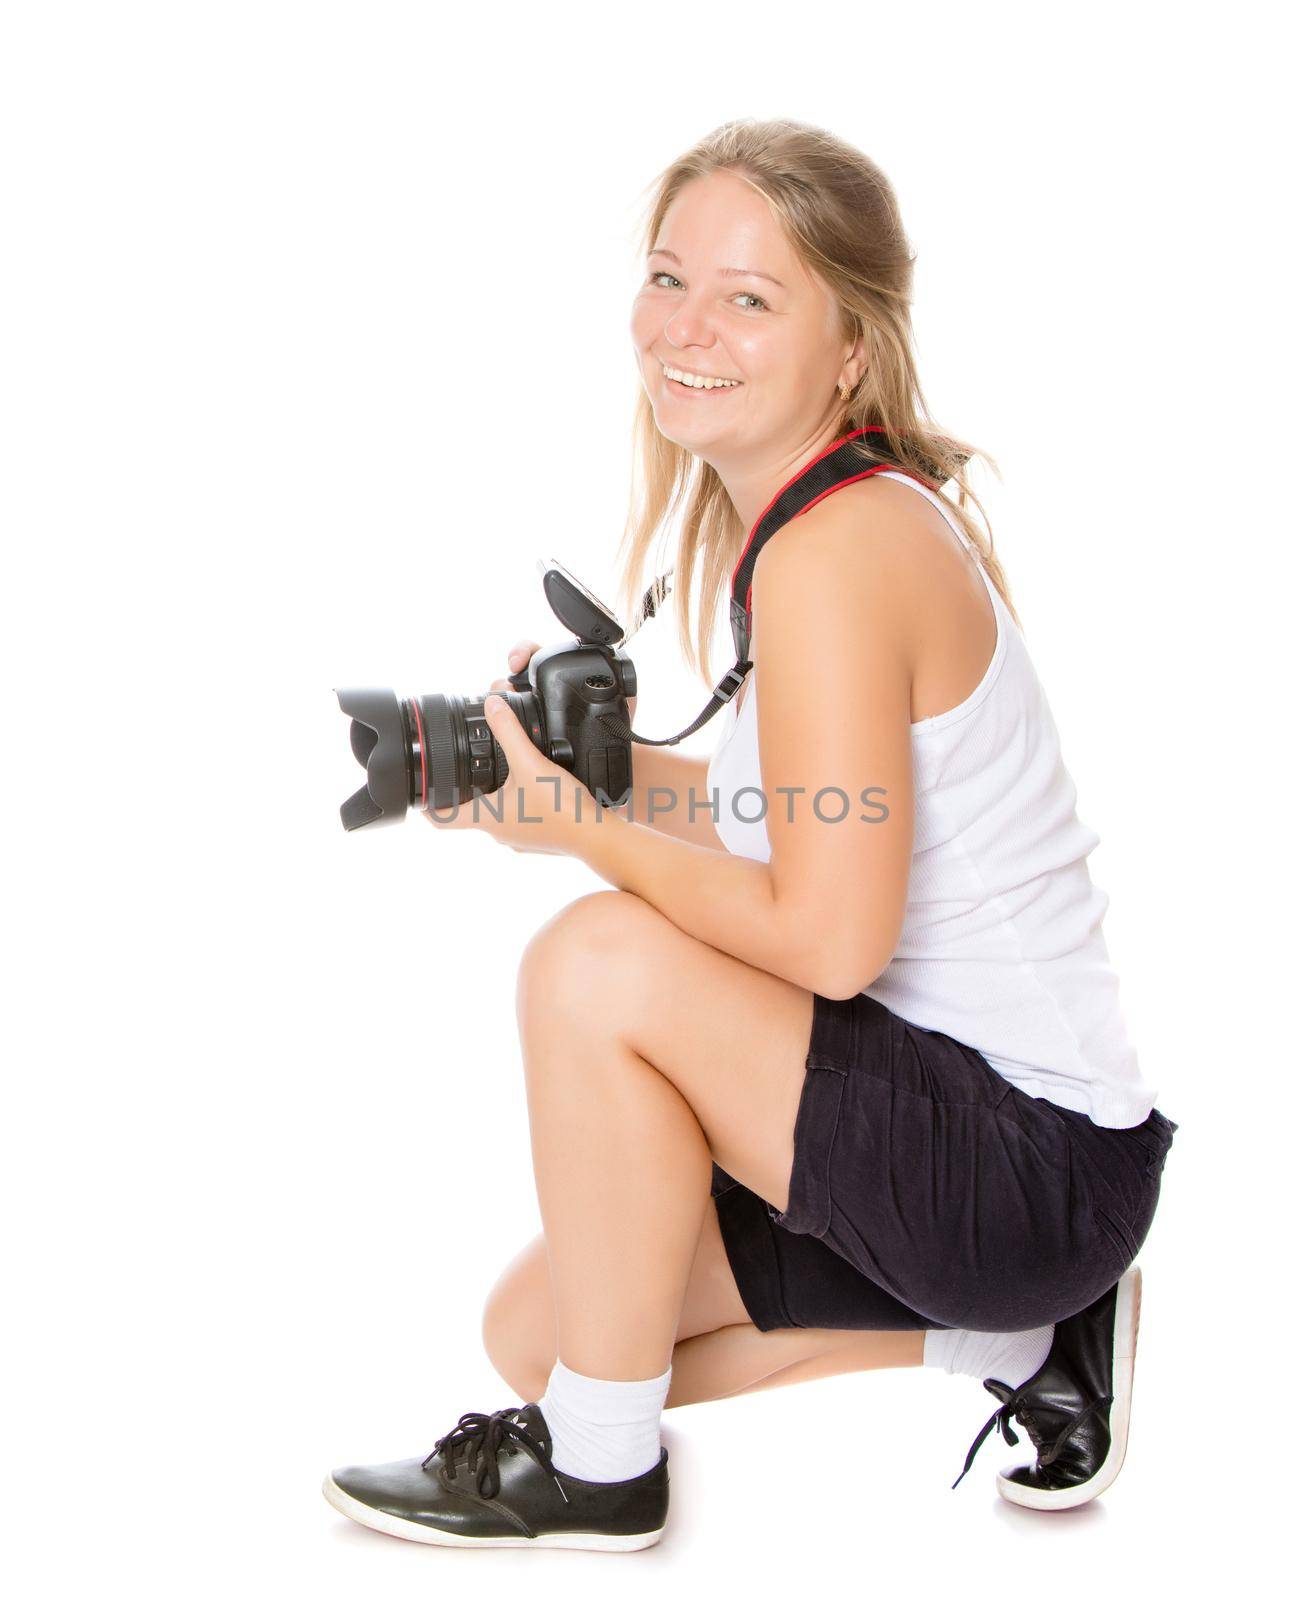 Cute young girl in white shirt drawing,with a professional camera.Isolated on white background